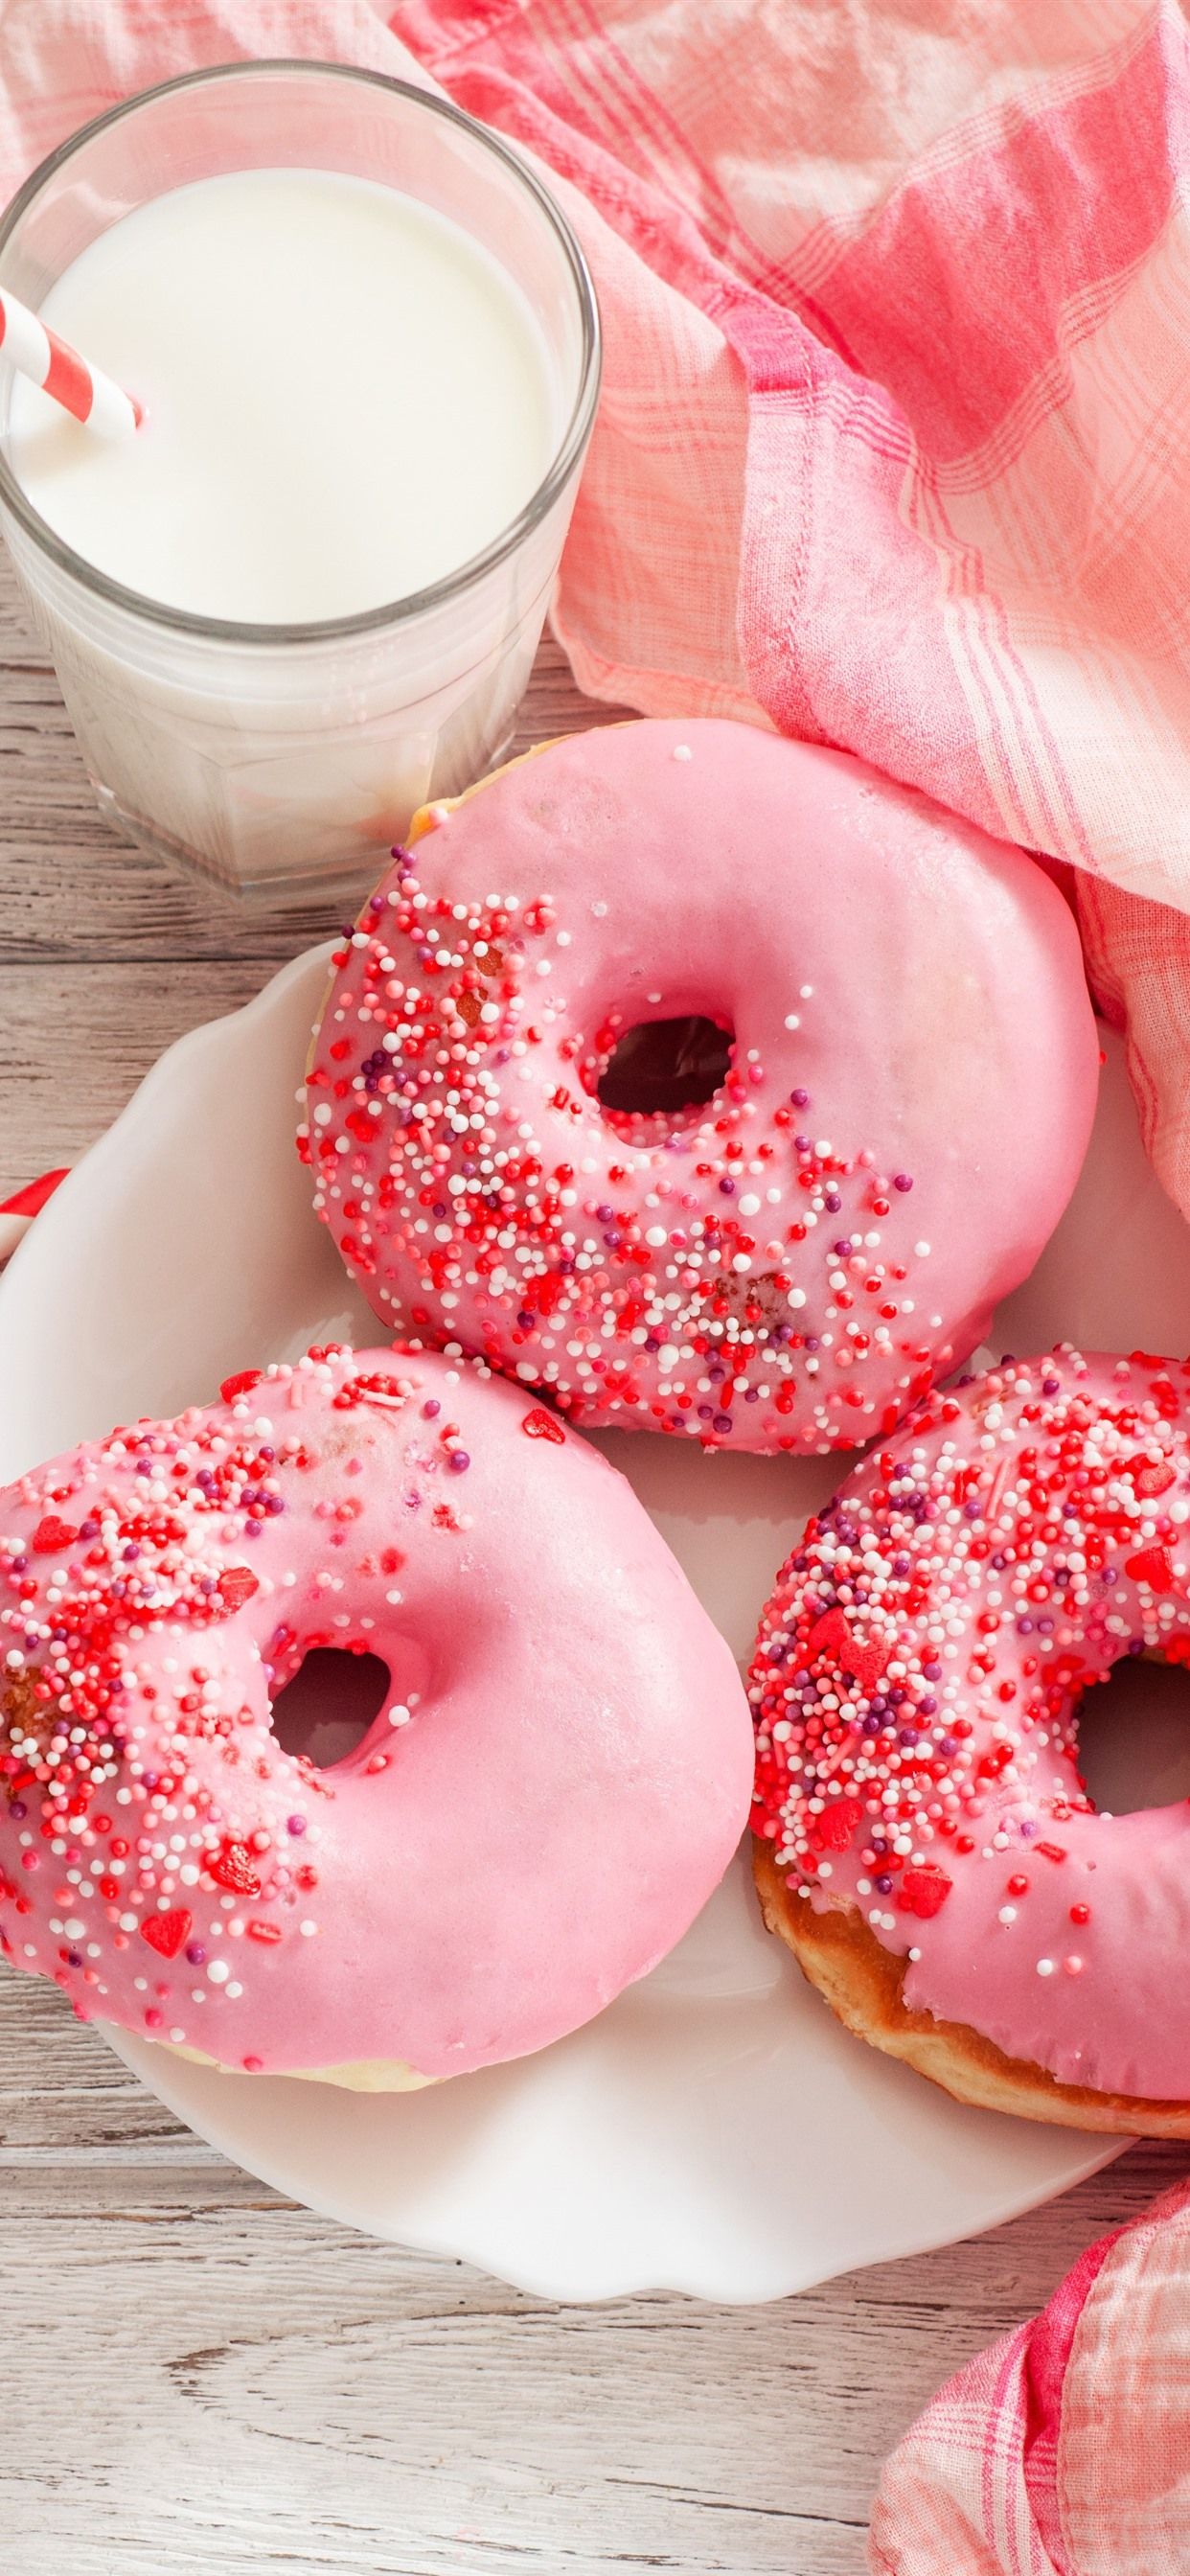 1242x2688 Pink Donut Milk Food Breakfast 1242x2688 Iphone 11 Pro Xs Max Wallpaper Background Picture Image